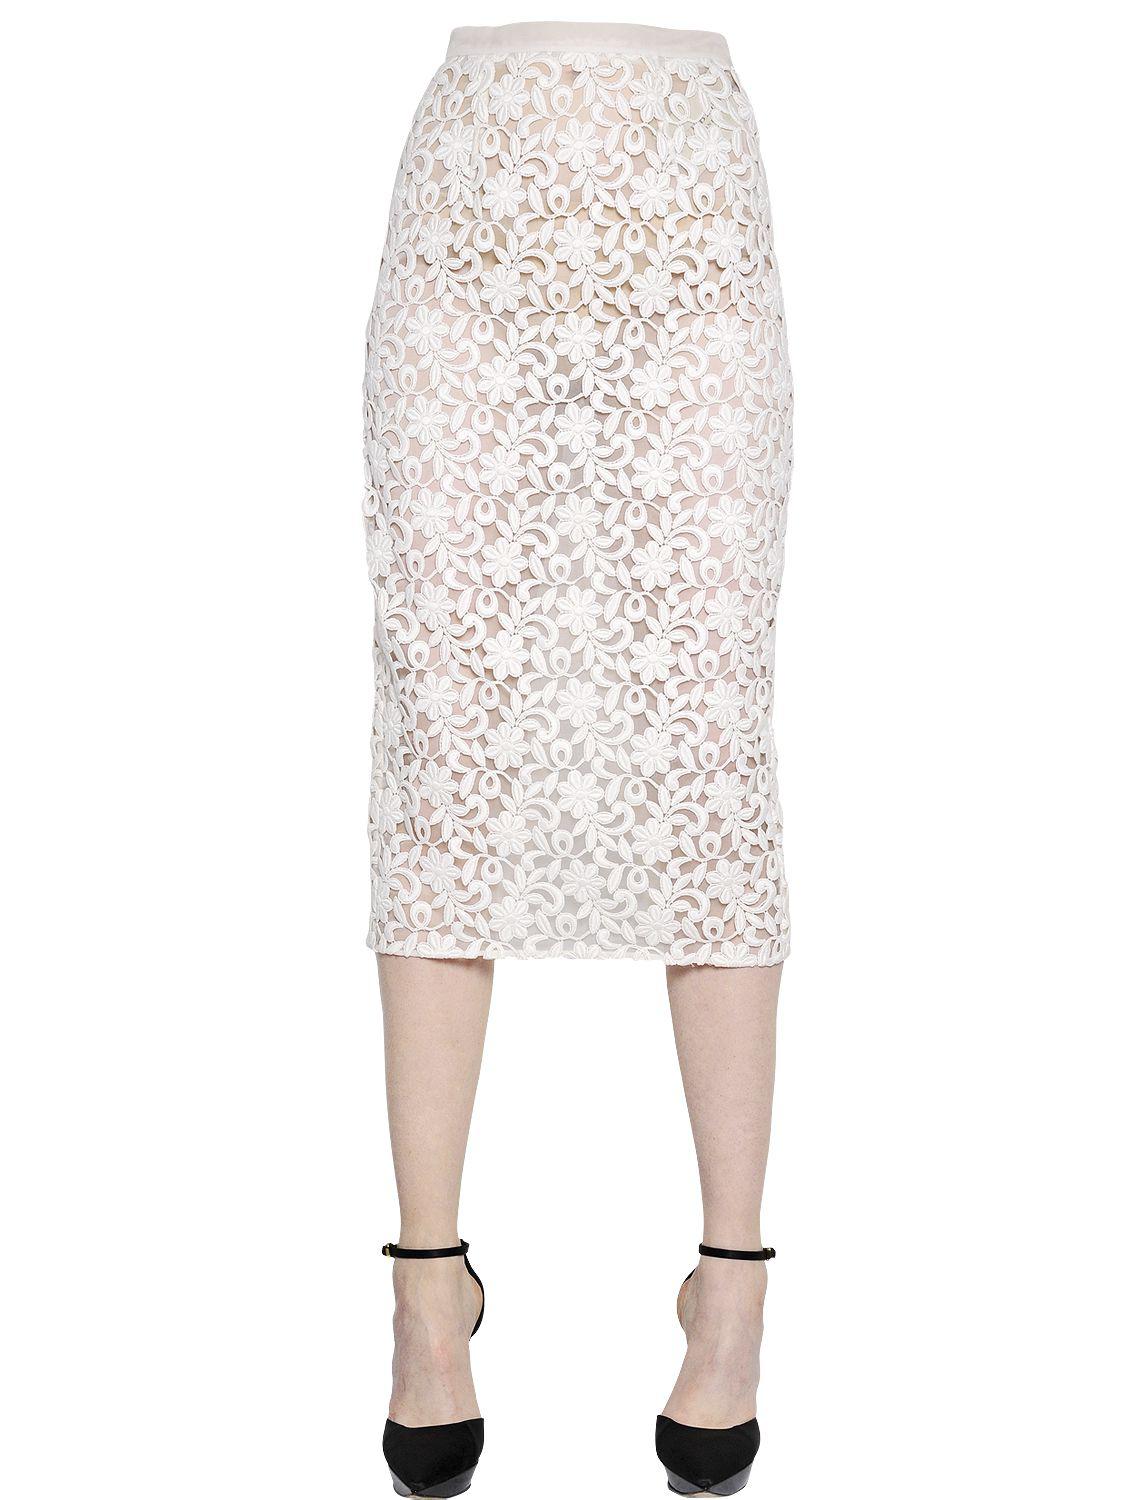 Burberry Cotton Lace & Organza Pencil Skirt in White - Lyst